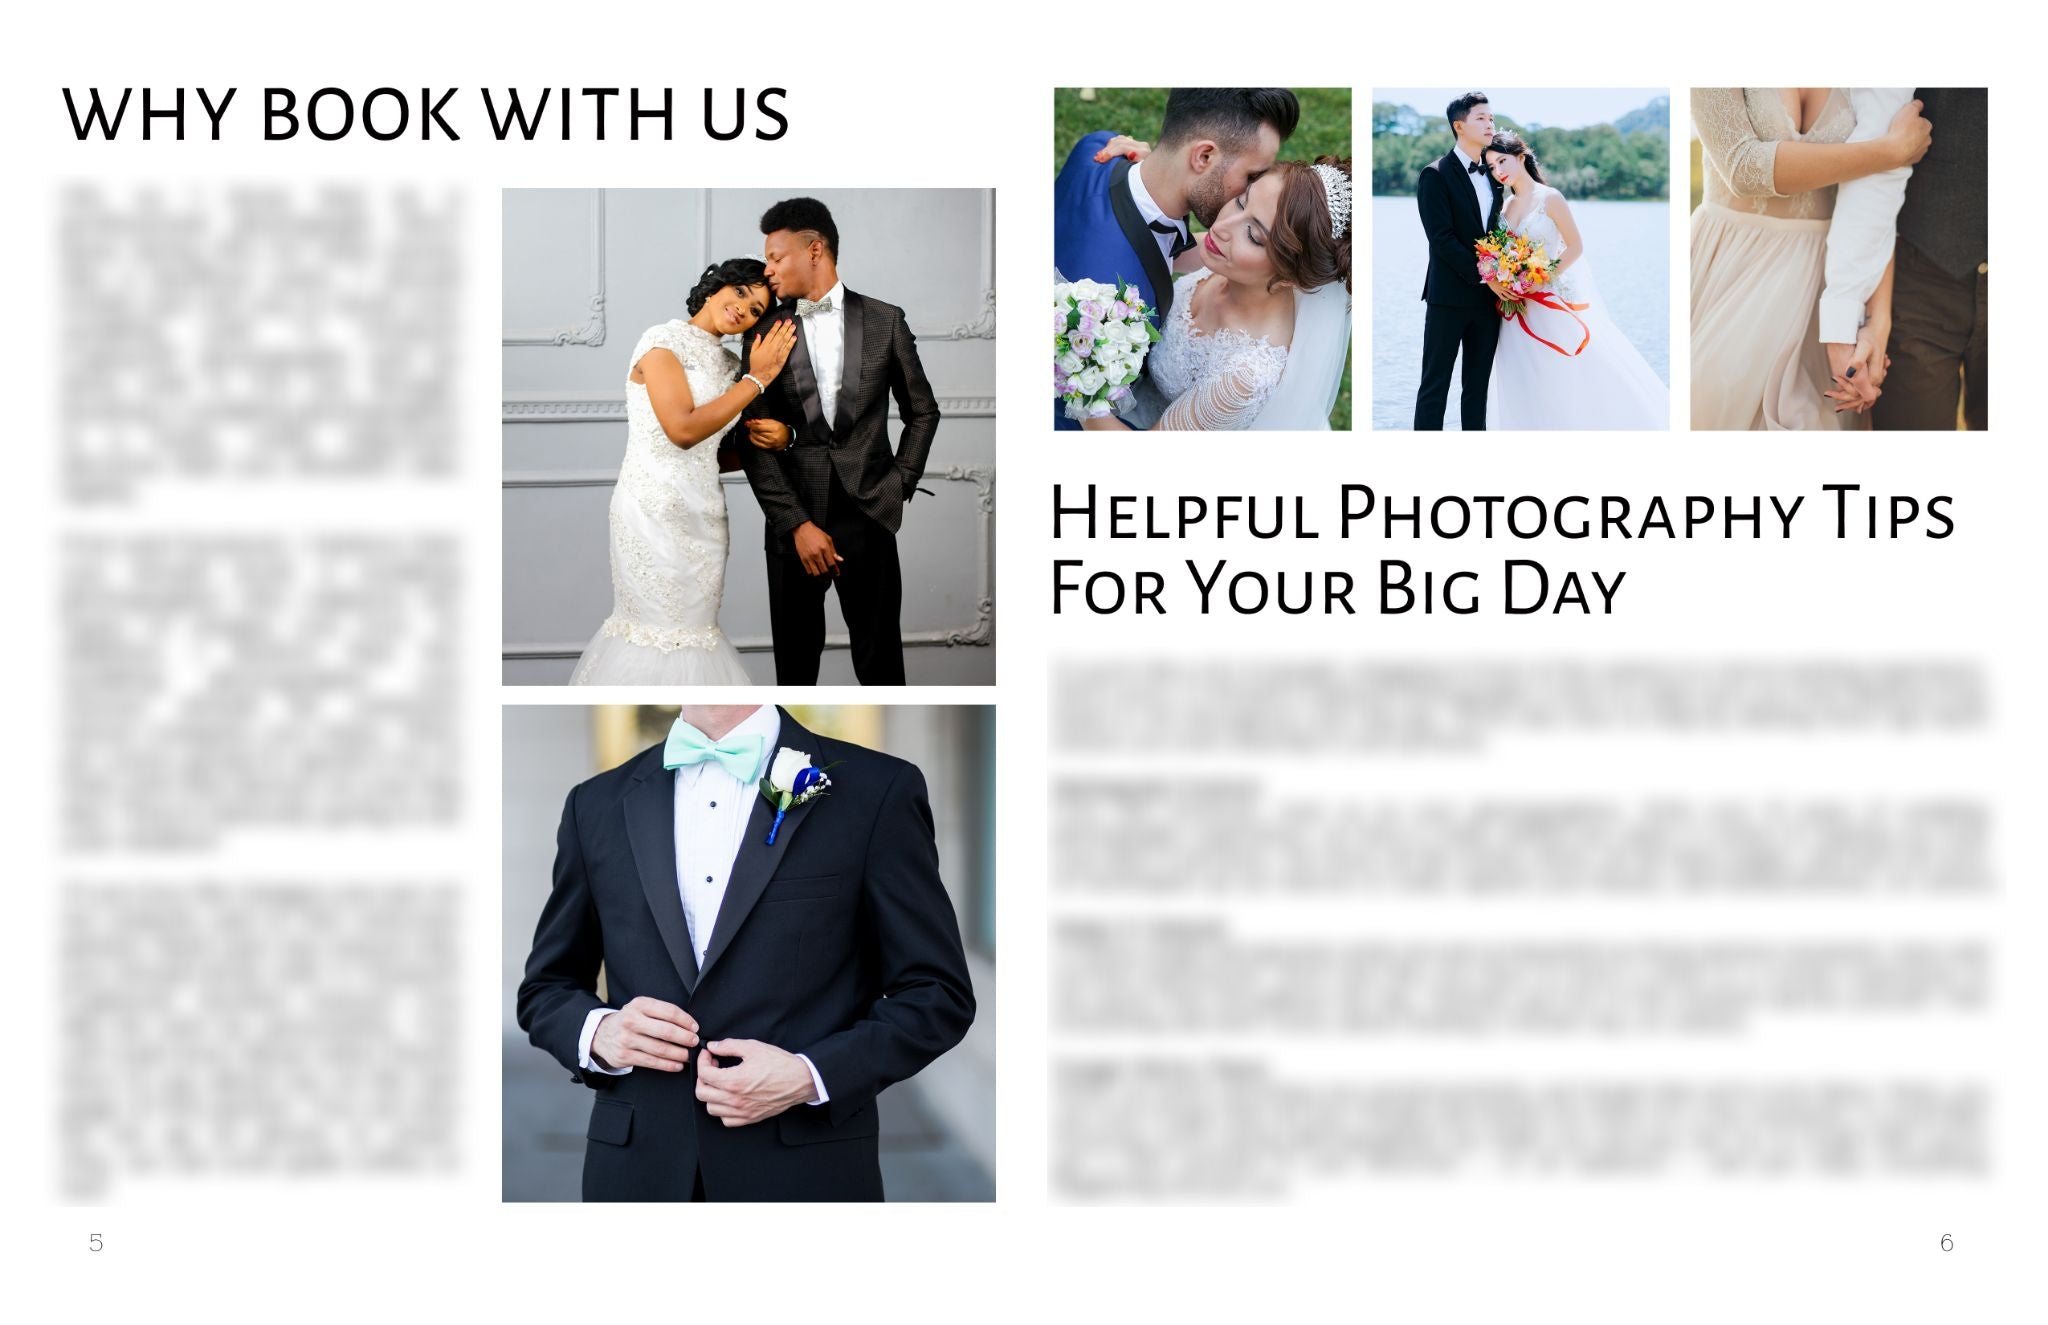 Wedding Photography Client Guide Packet Template BP4U